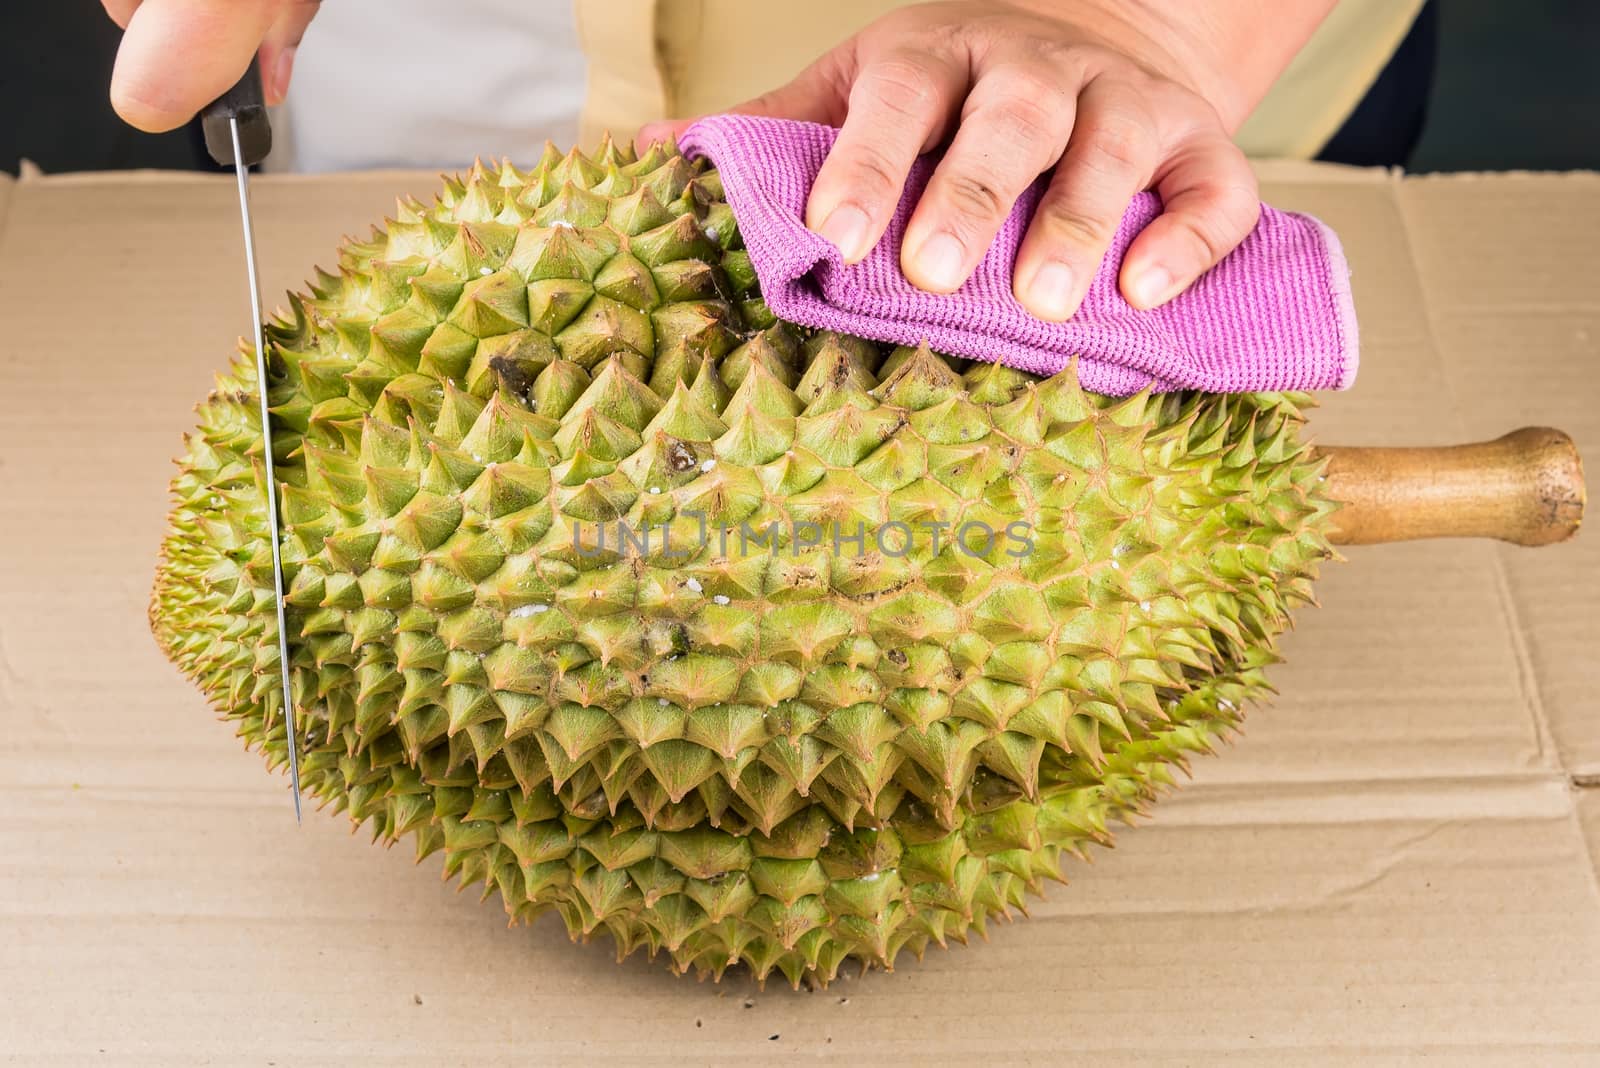 Woman cutting a Durian fruit on the wooden table by using a knif by Bubbers